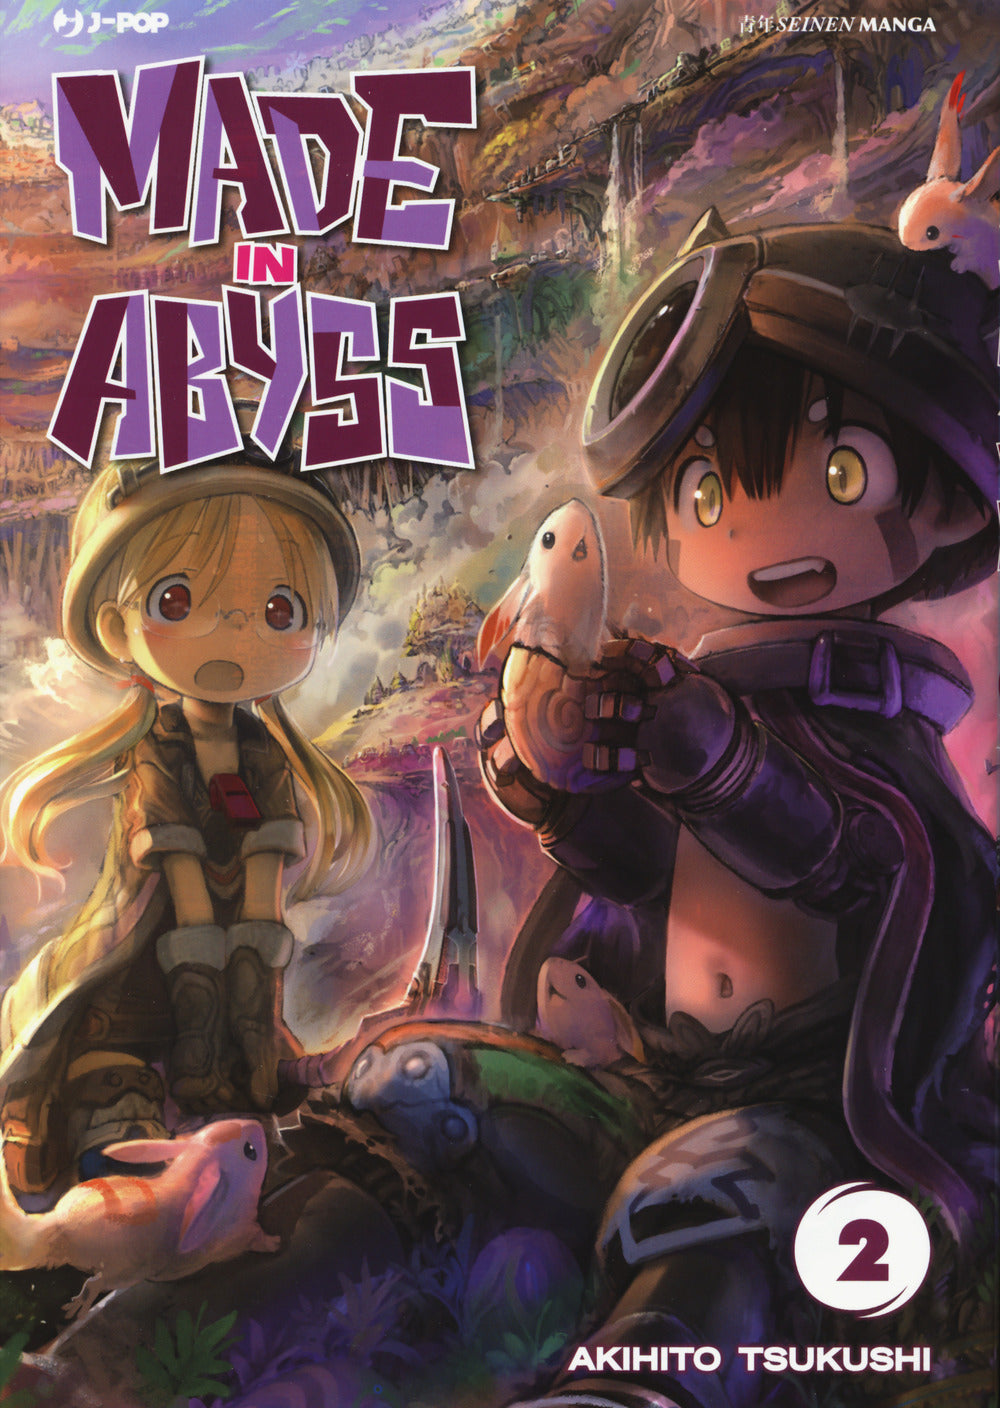 Made in abyss. Vol. 2.